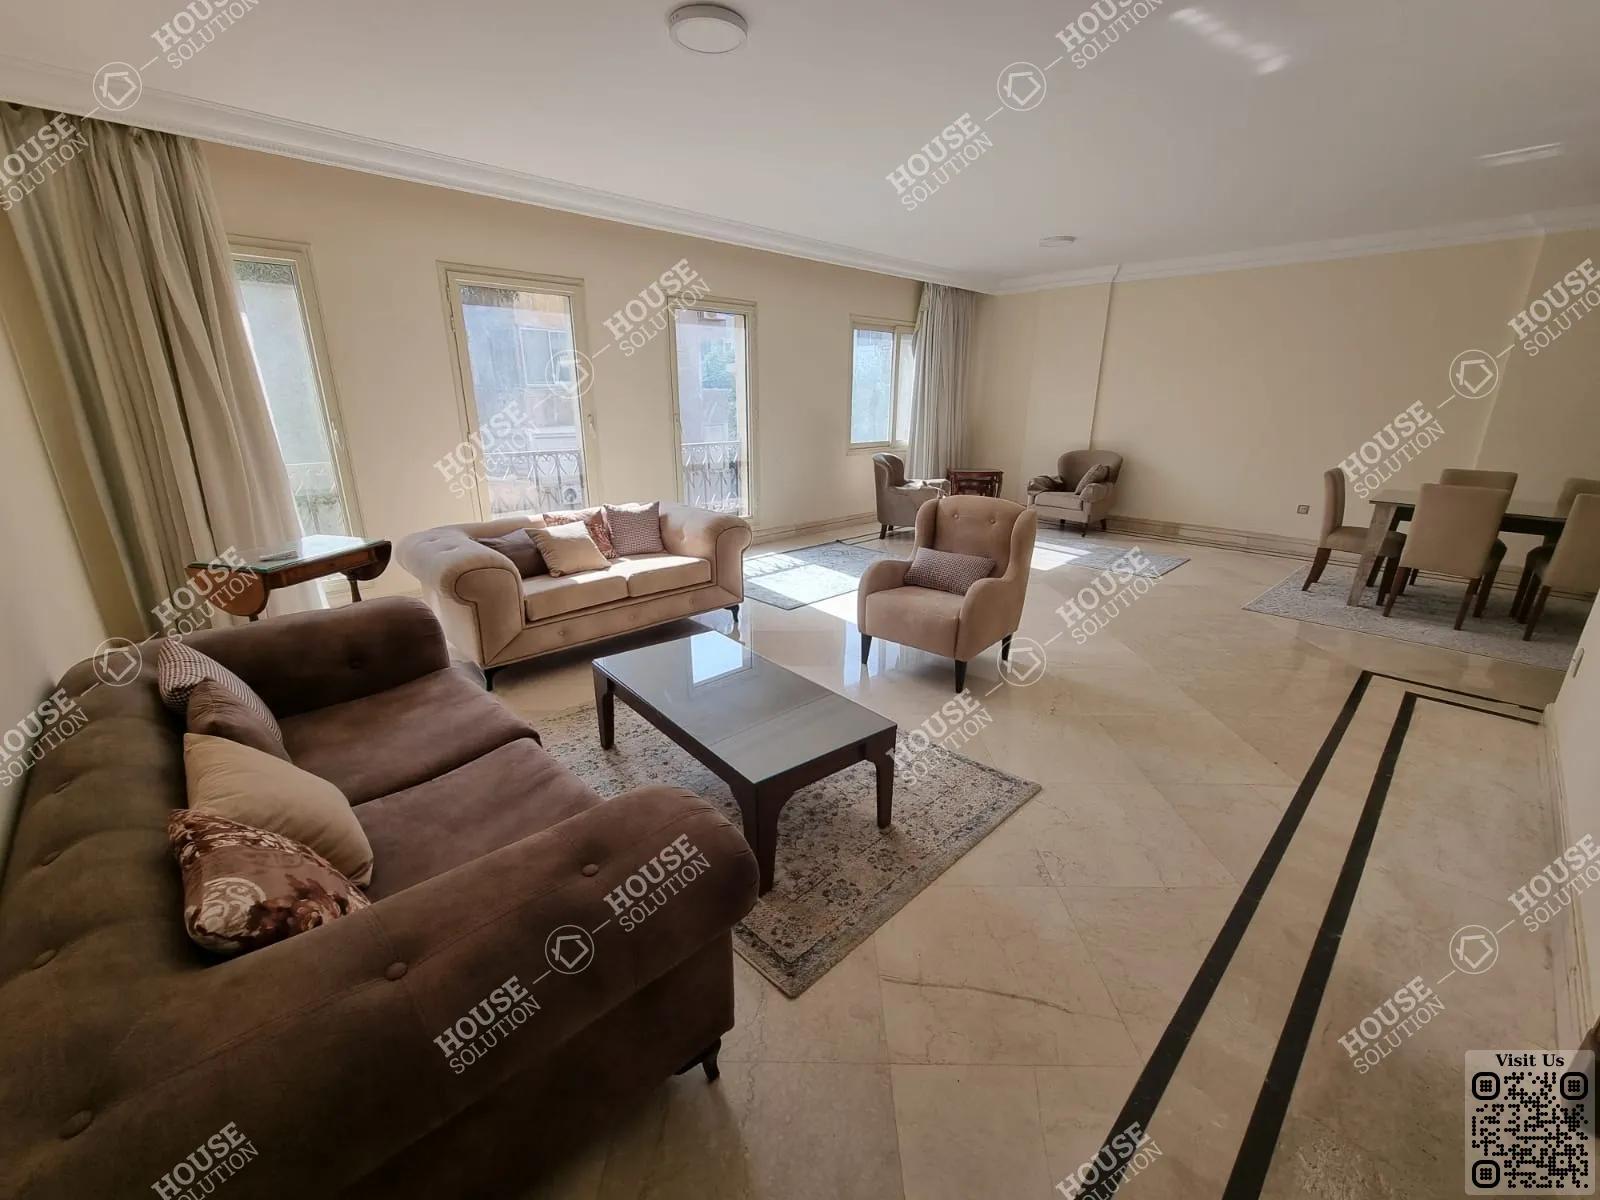 RECEPTION  @ Apartments For Rent In Maadi Maadi Sarayat Area: 280 m² consists of 3 Bedrooms 3 Bathrooms Modern furnished 5 stars #5163-0